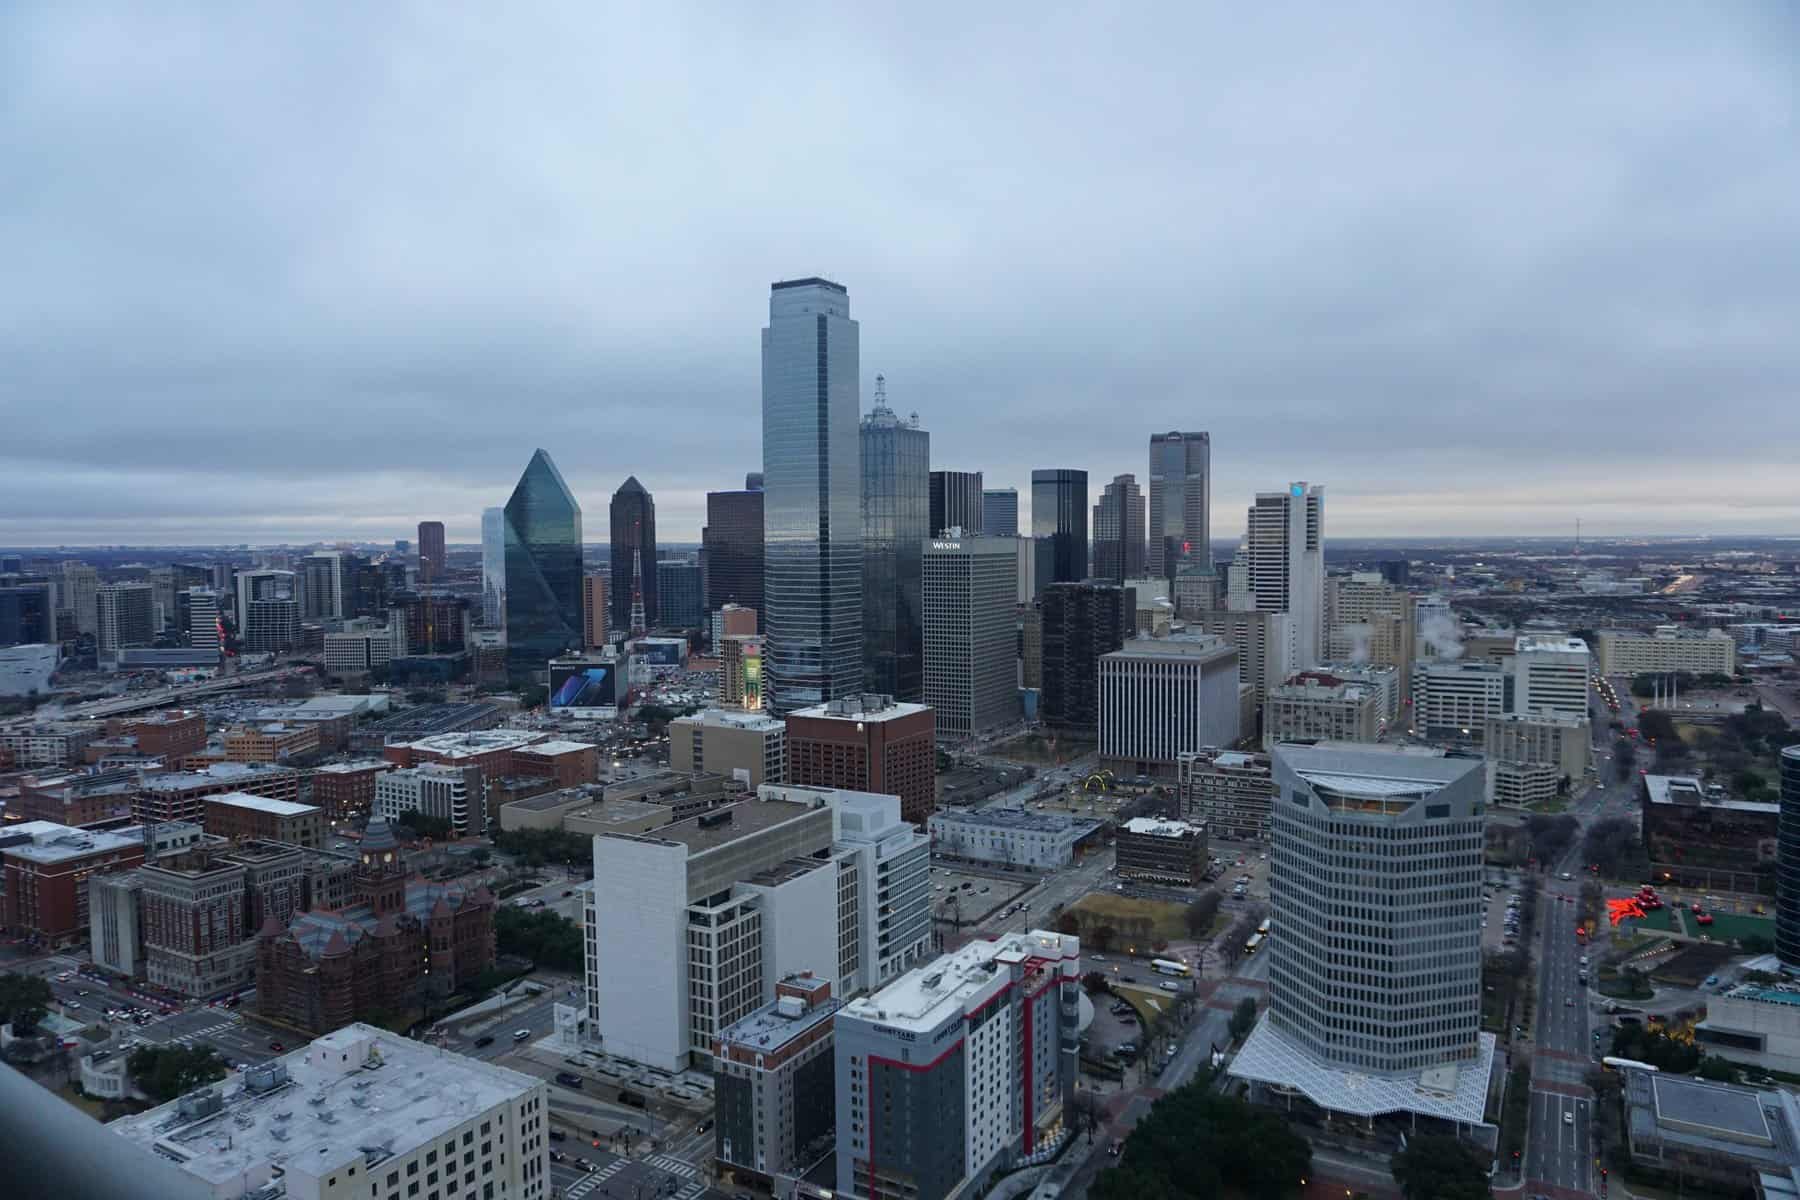 The views from Reunion Tower